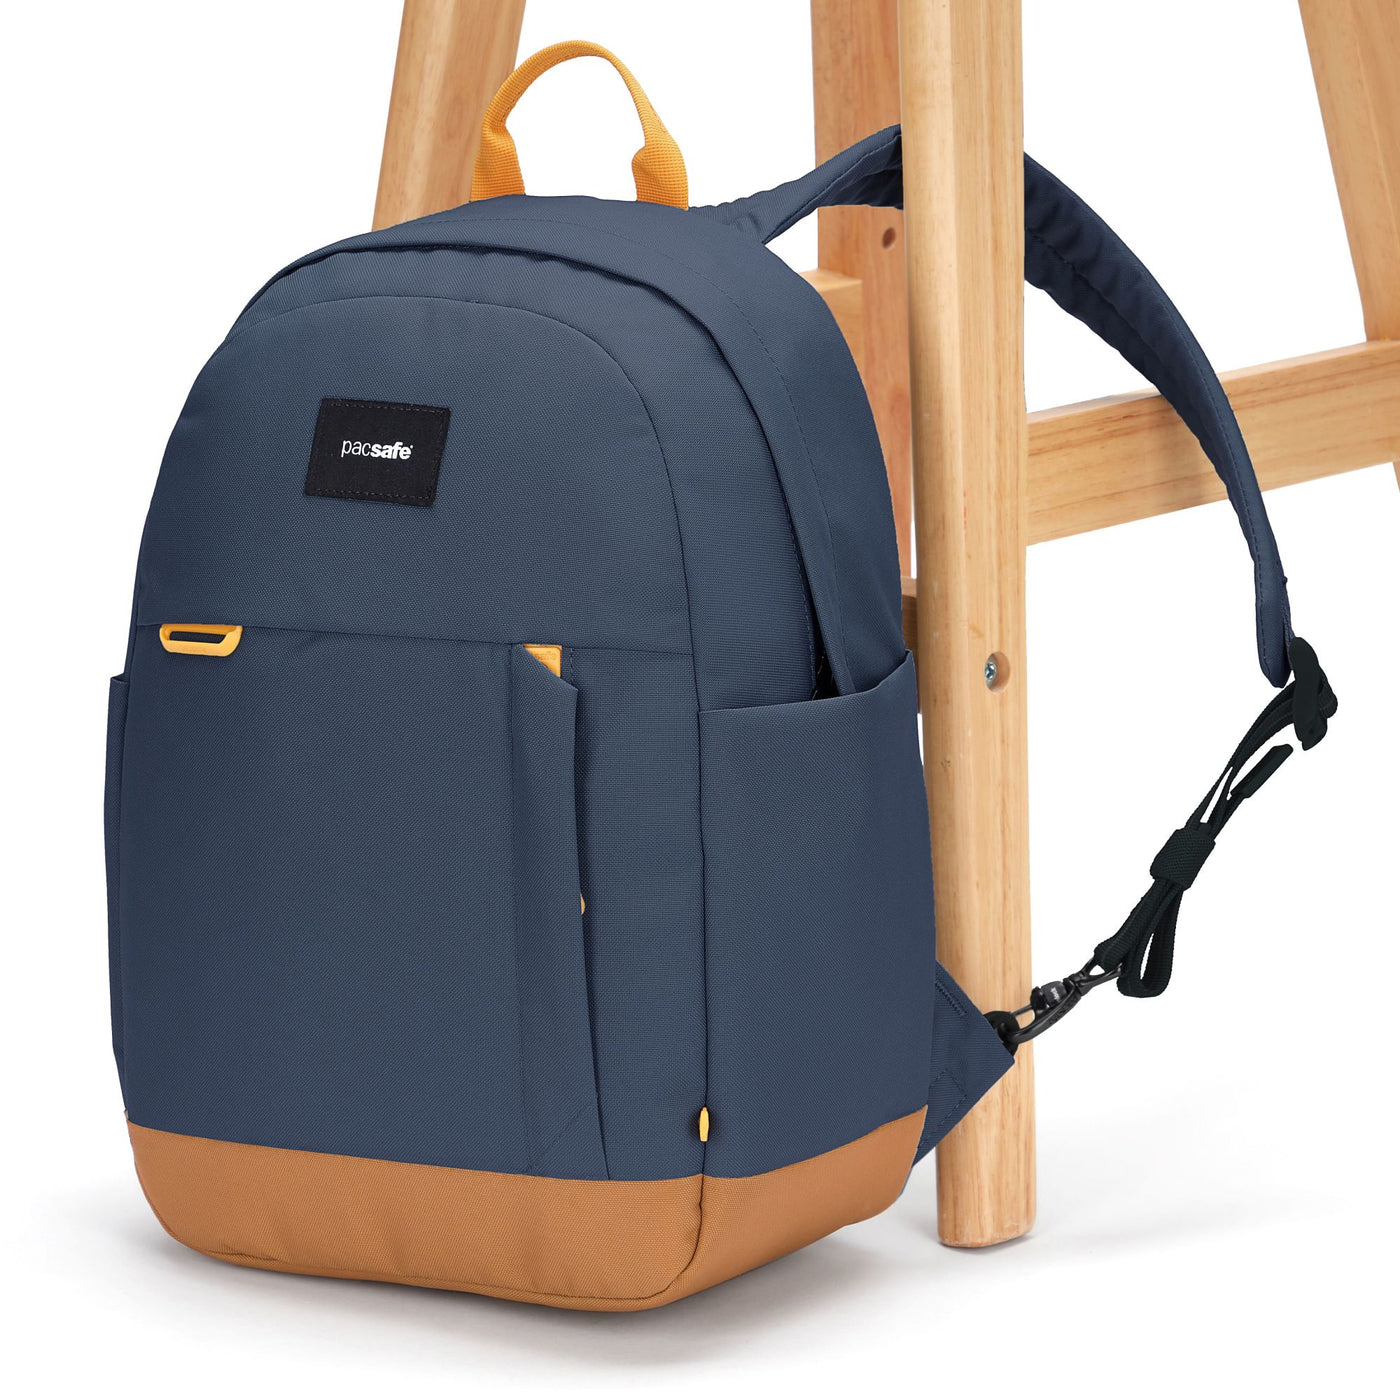 PacsafeGO 15L Backpack